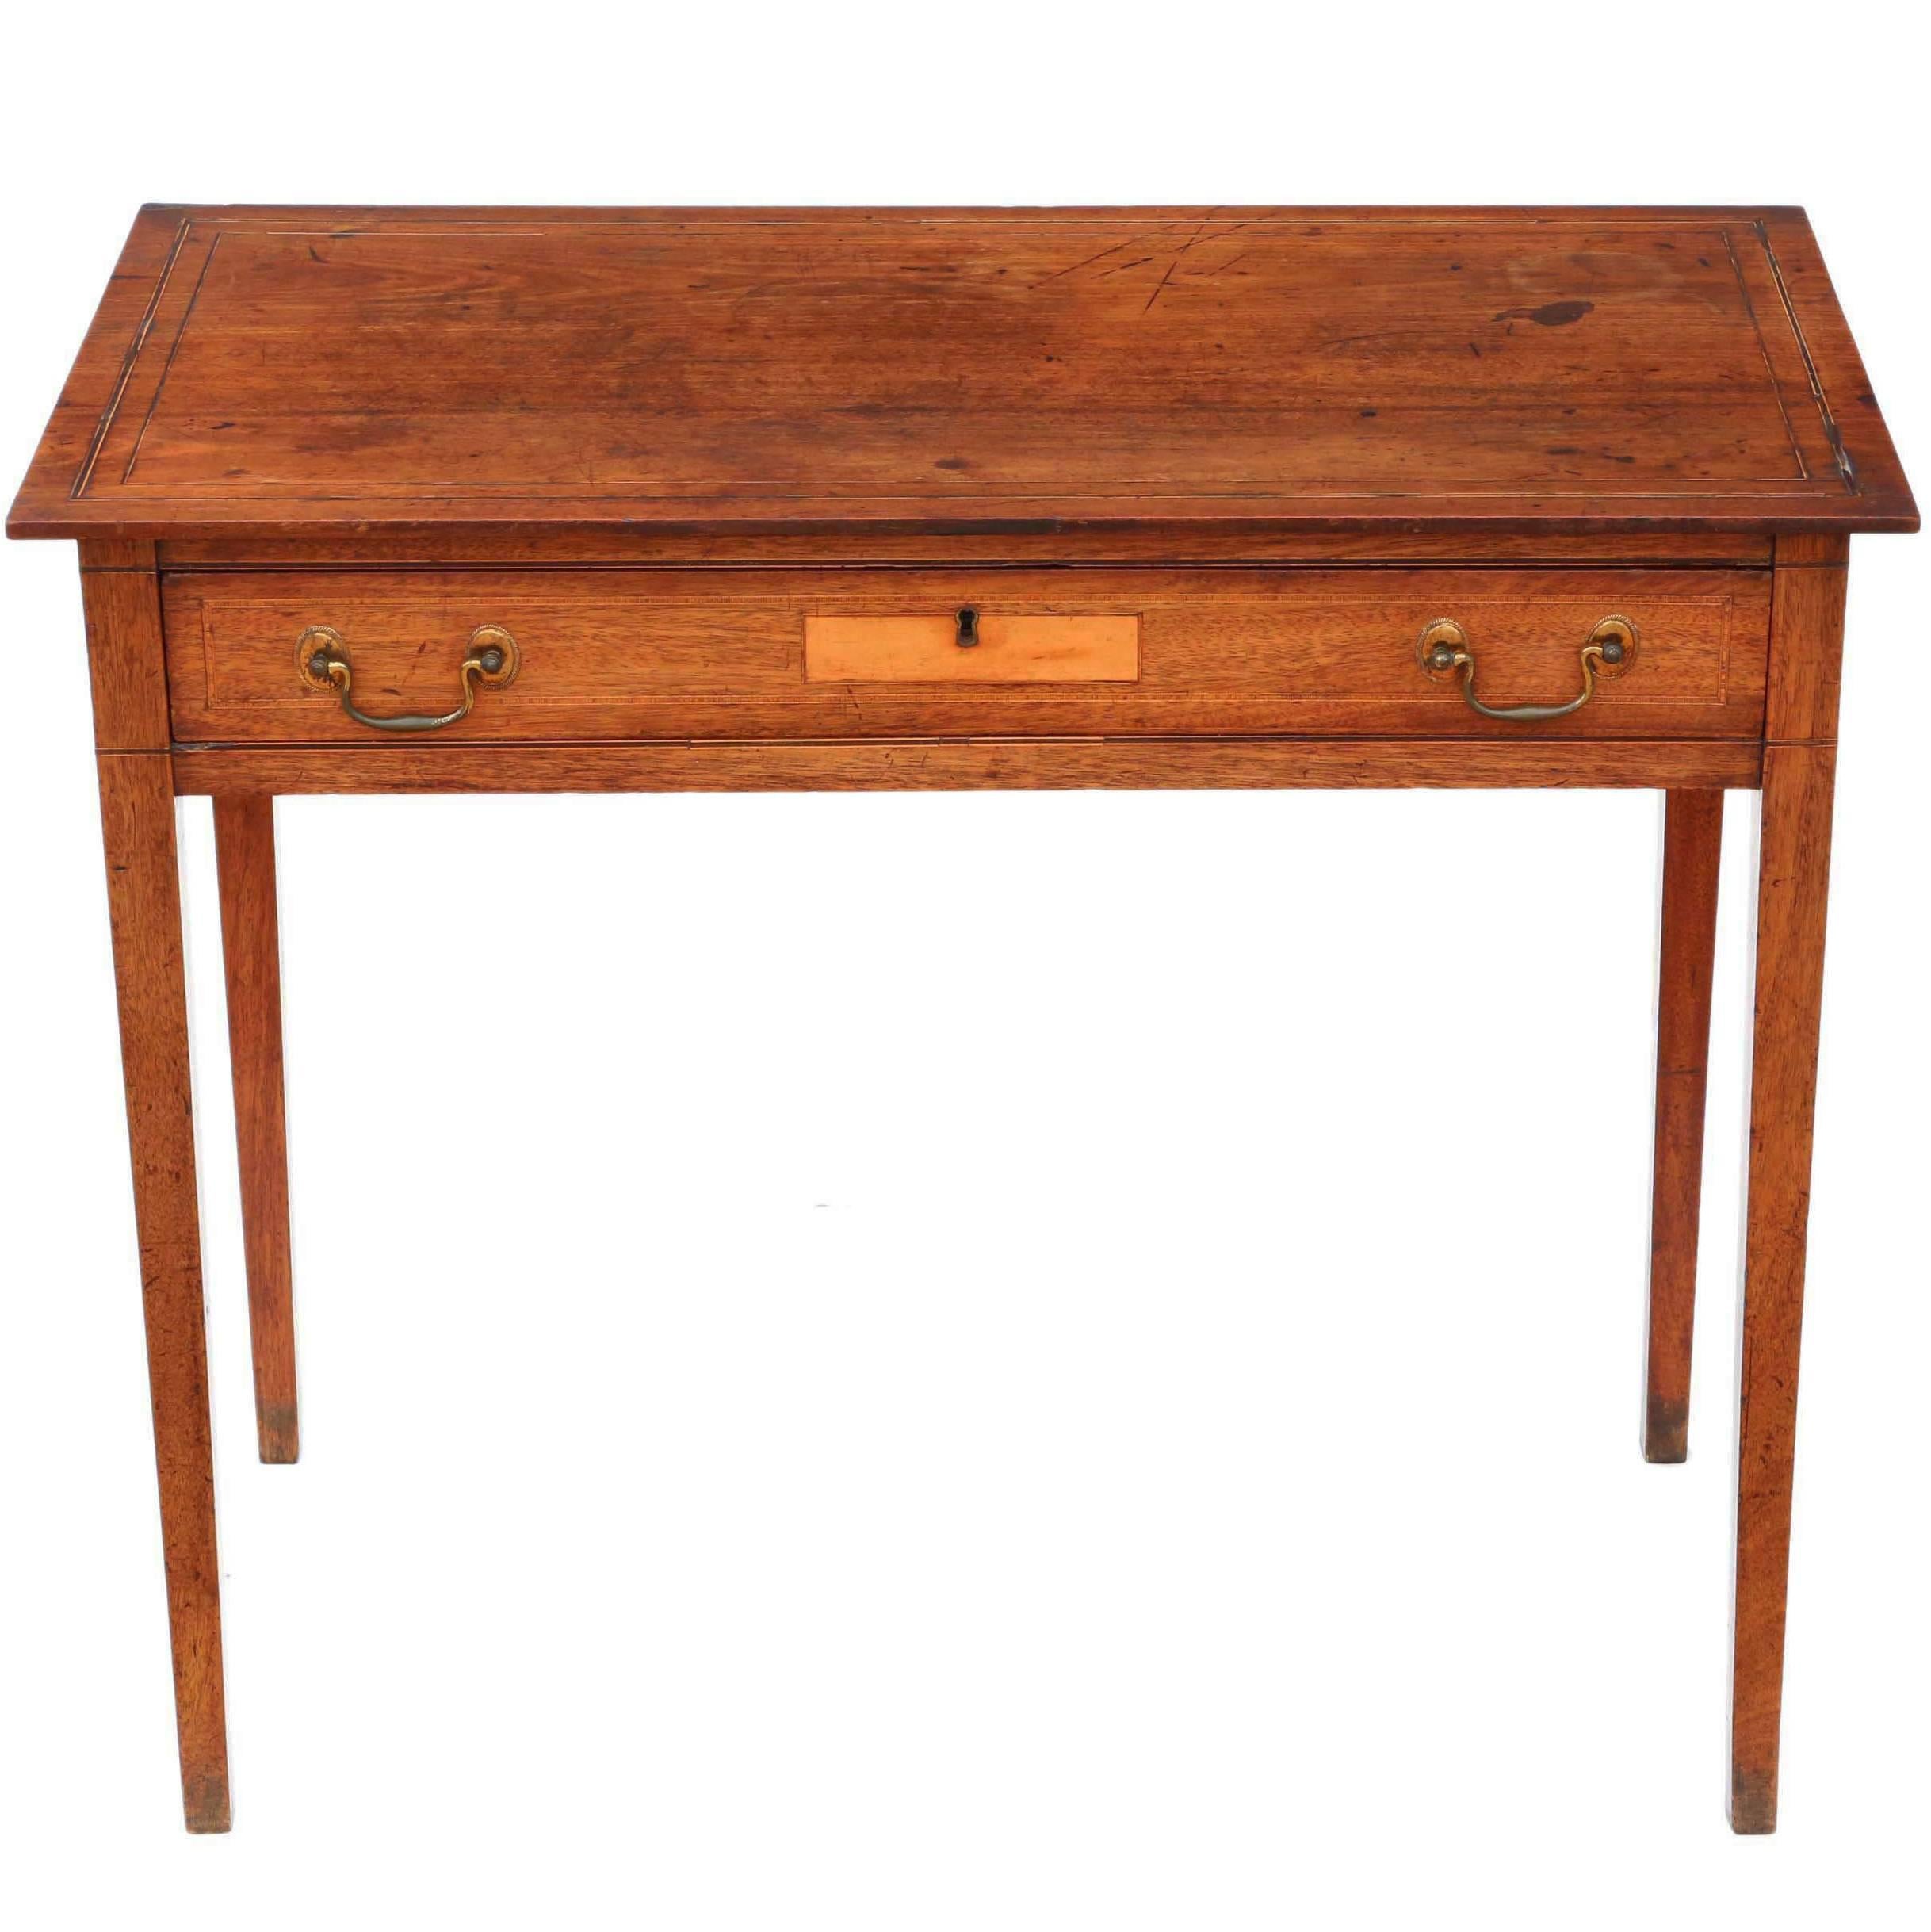 Antique Quality George III circa 1810 Inlaid Mahogany Desk or Writing Table For Sale